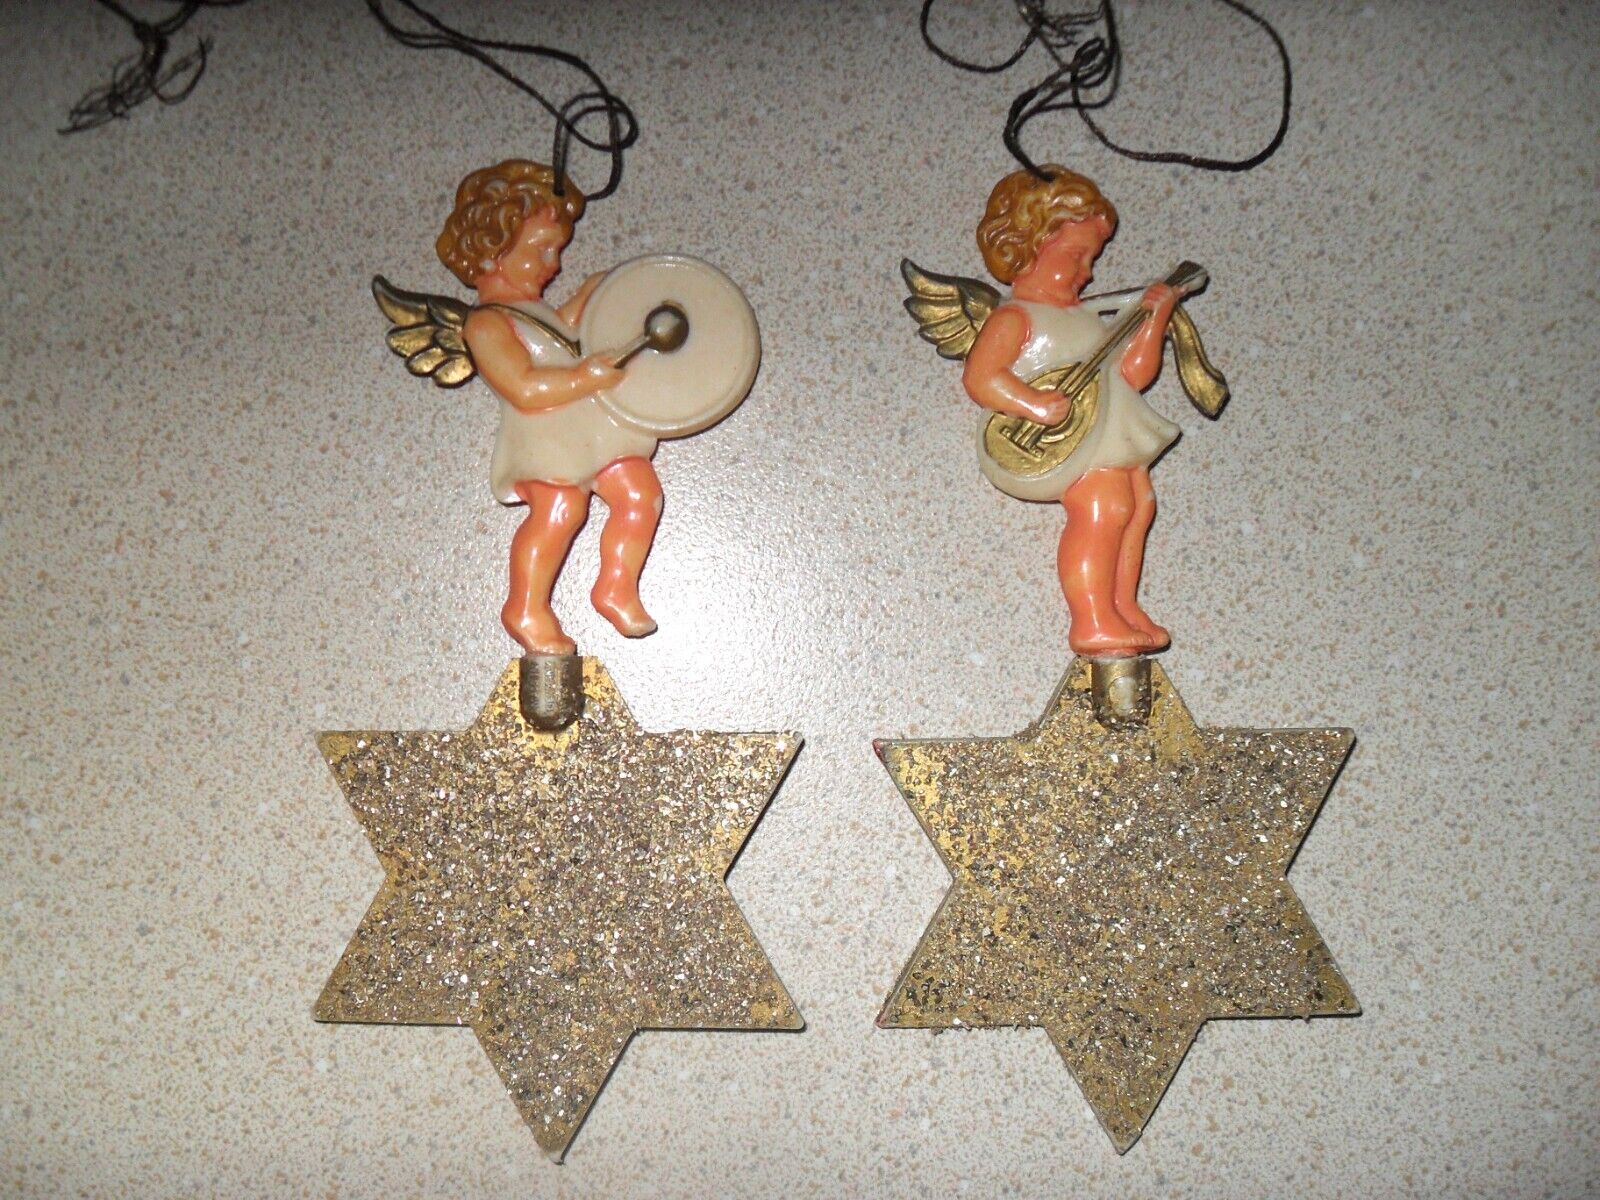 Vintage Germany Made Celluloid Plastic Angel Band Ornaments on Mica Glitter Star